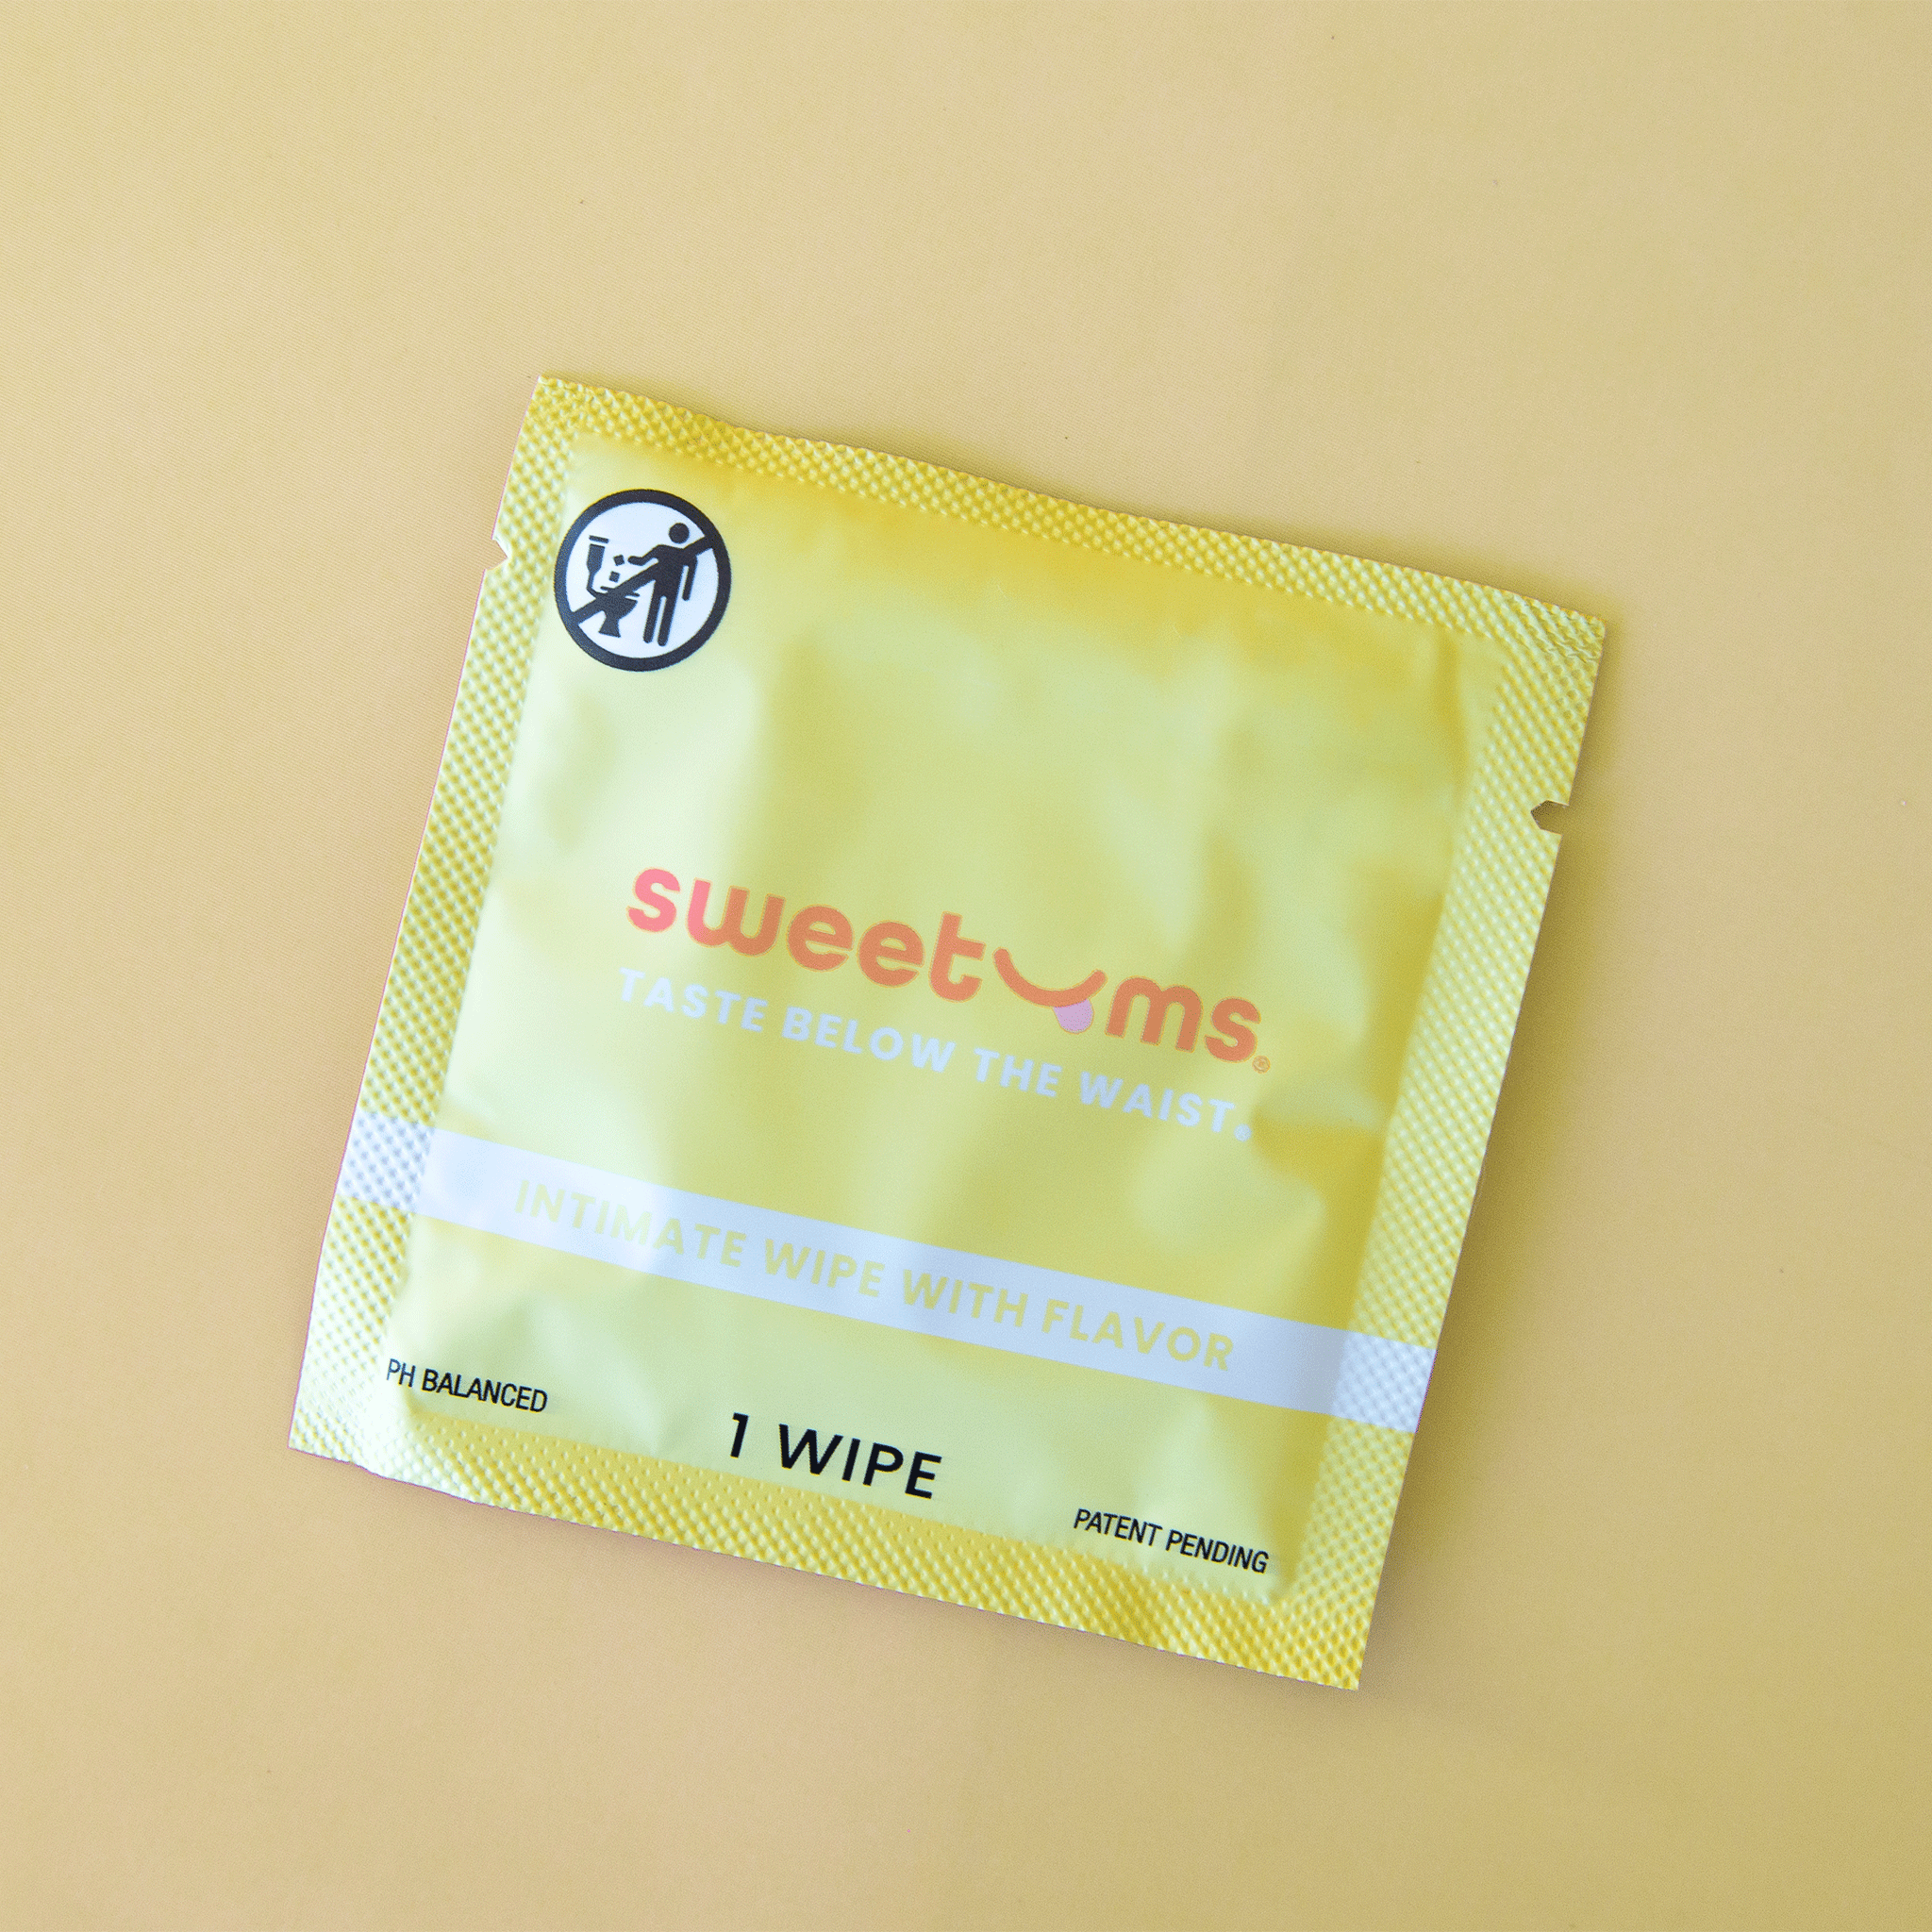 On a yellow background is a yellow packet of a single use feminine wipe with text on the front that reads, "sweetums taste below the waist".